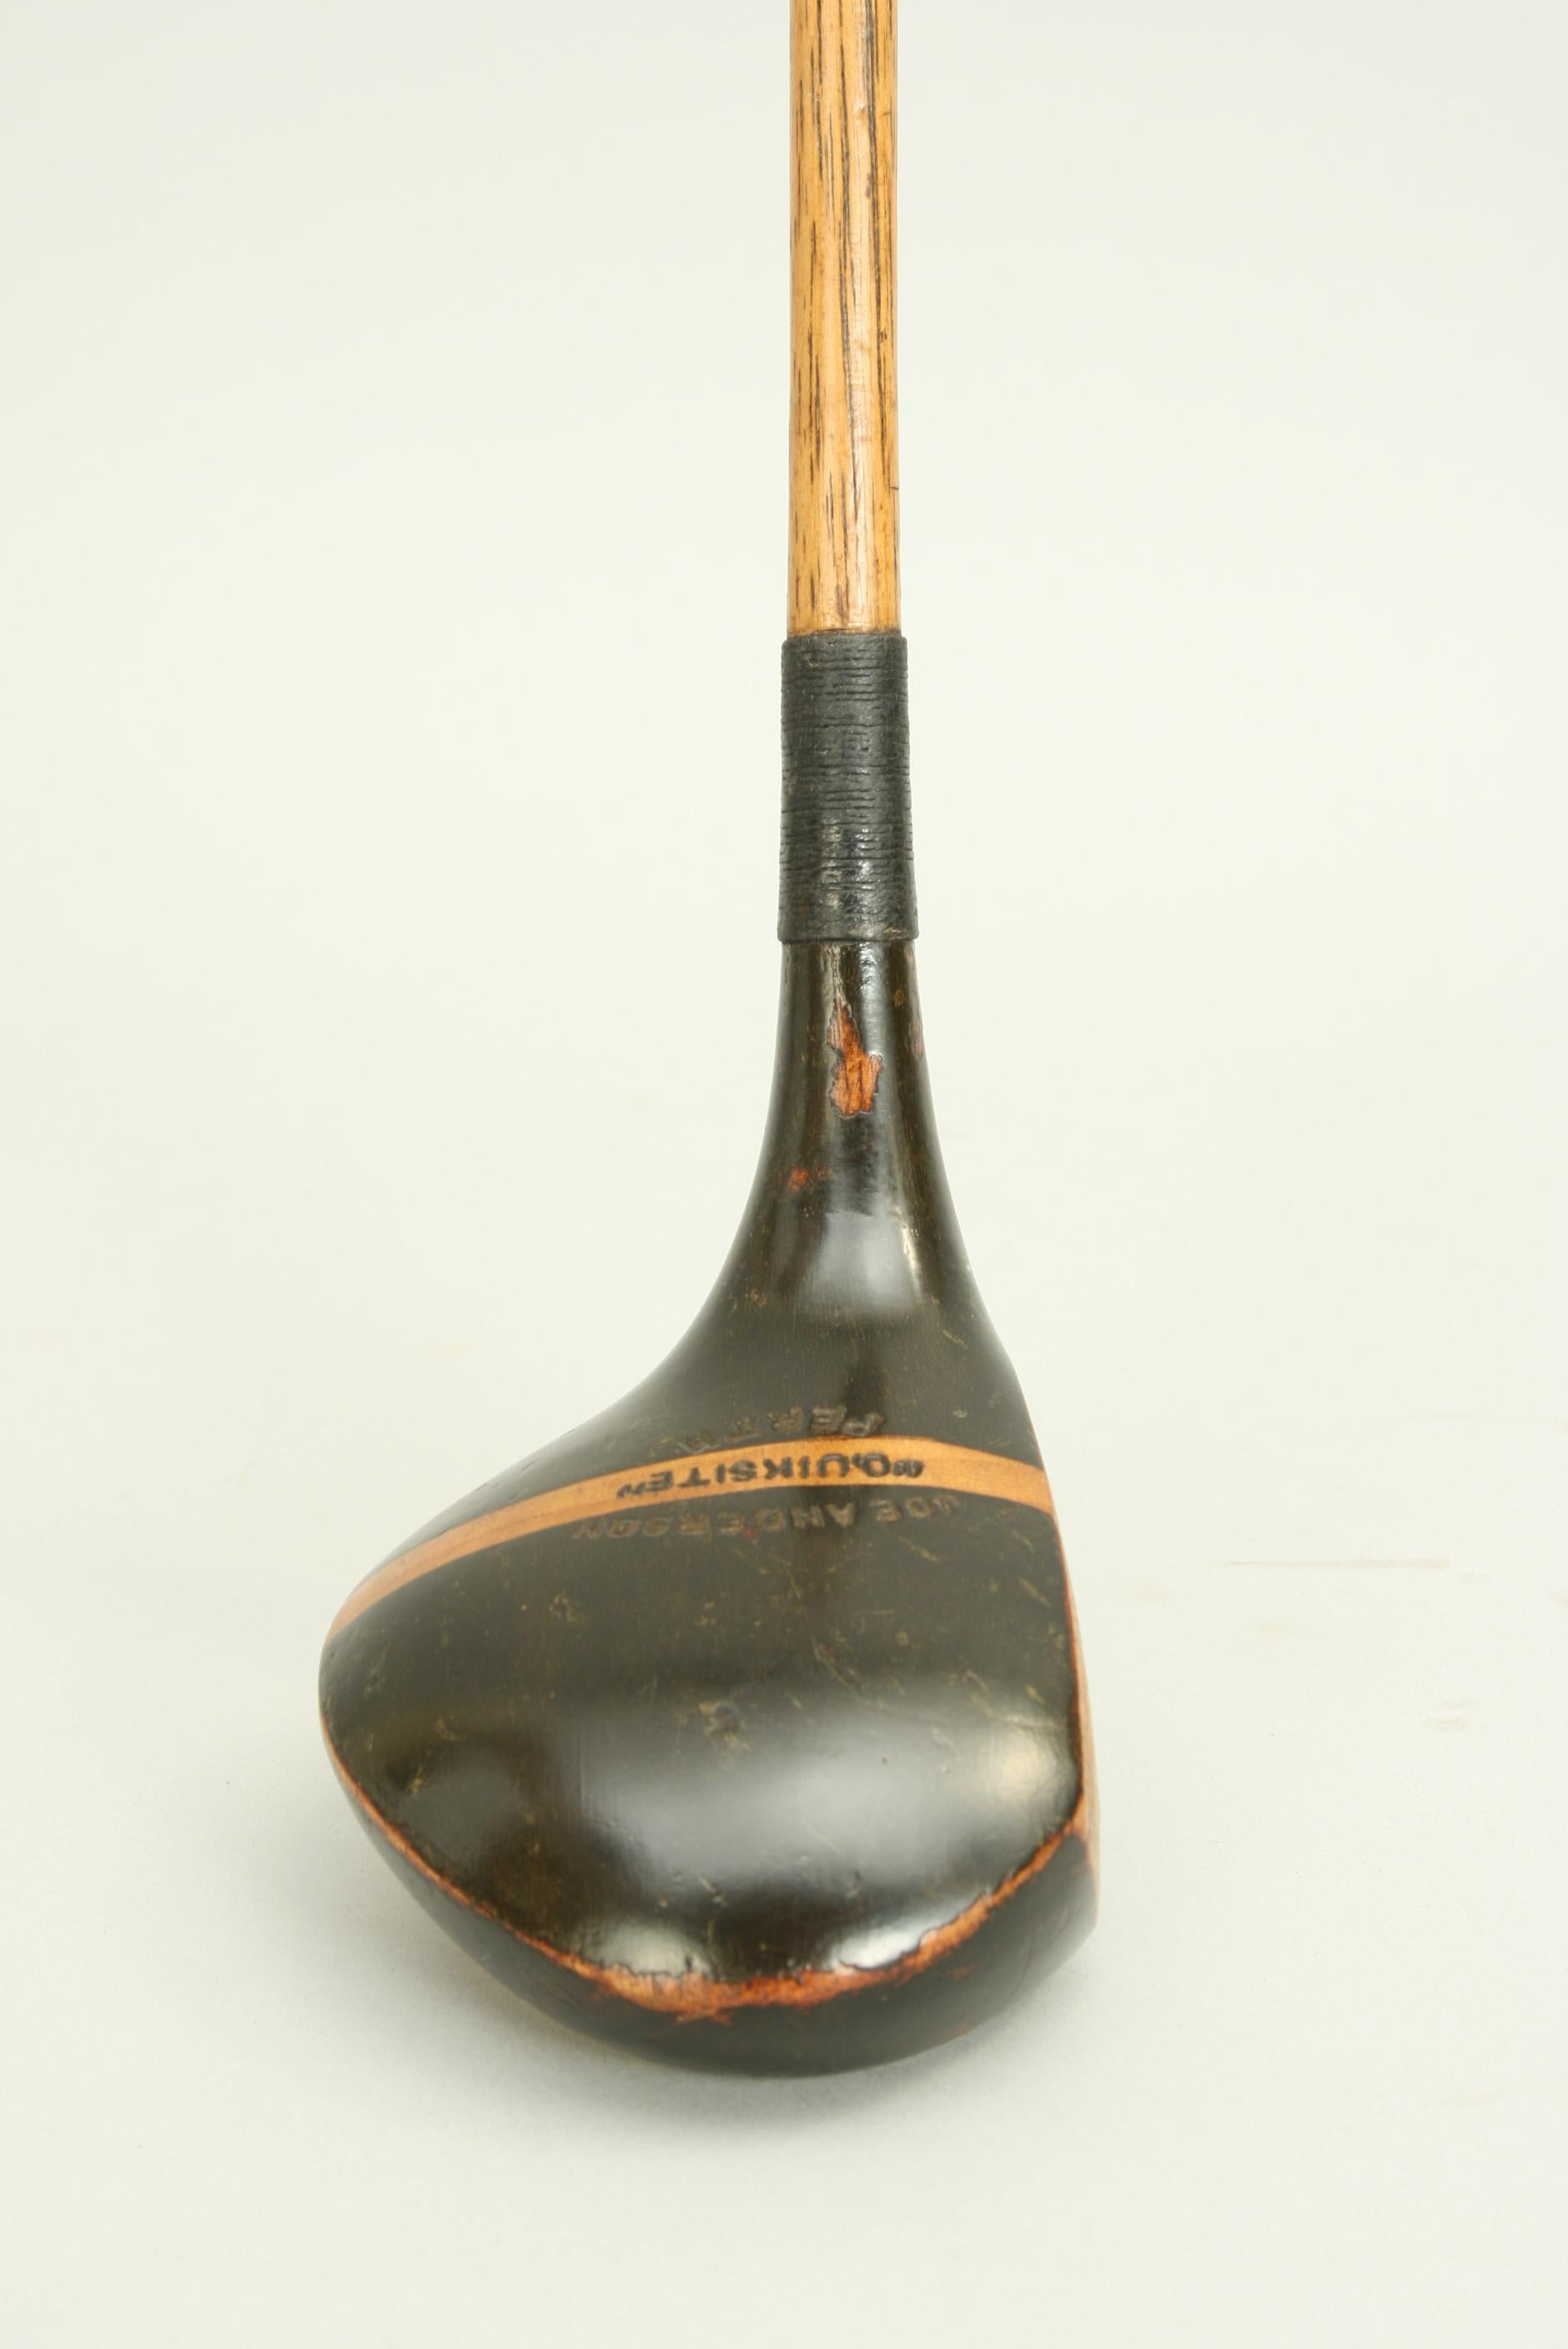 Antique Hickory Golf Club, 'Quiksite' driver, Joe Anderson, Perth.
A good 1920s persimmon wood socket head driver with hickory shaft and tapering polished leather grip, all in very good original condition. The head marked Joe Anderson 'QUIKSITE'